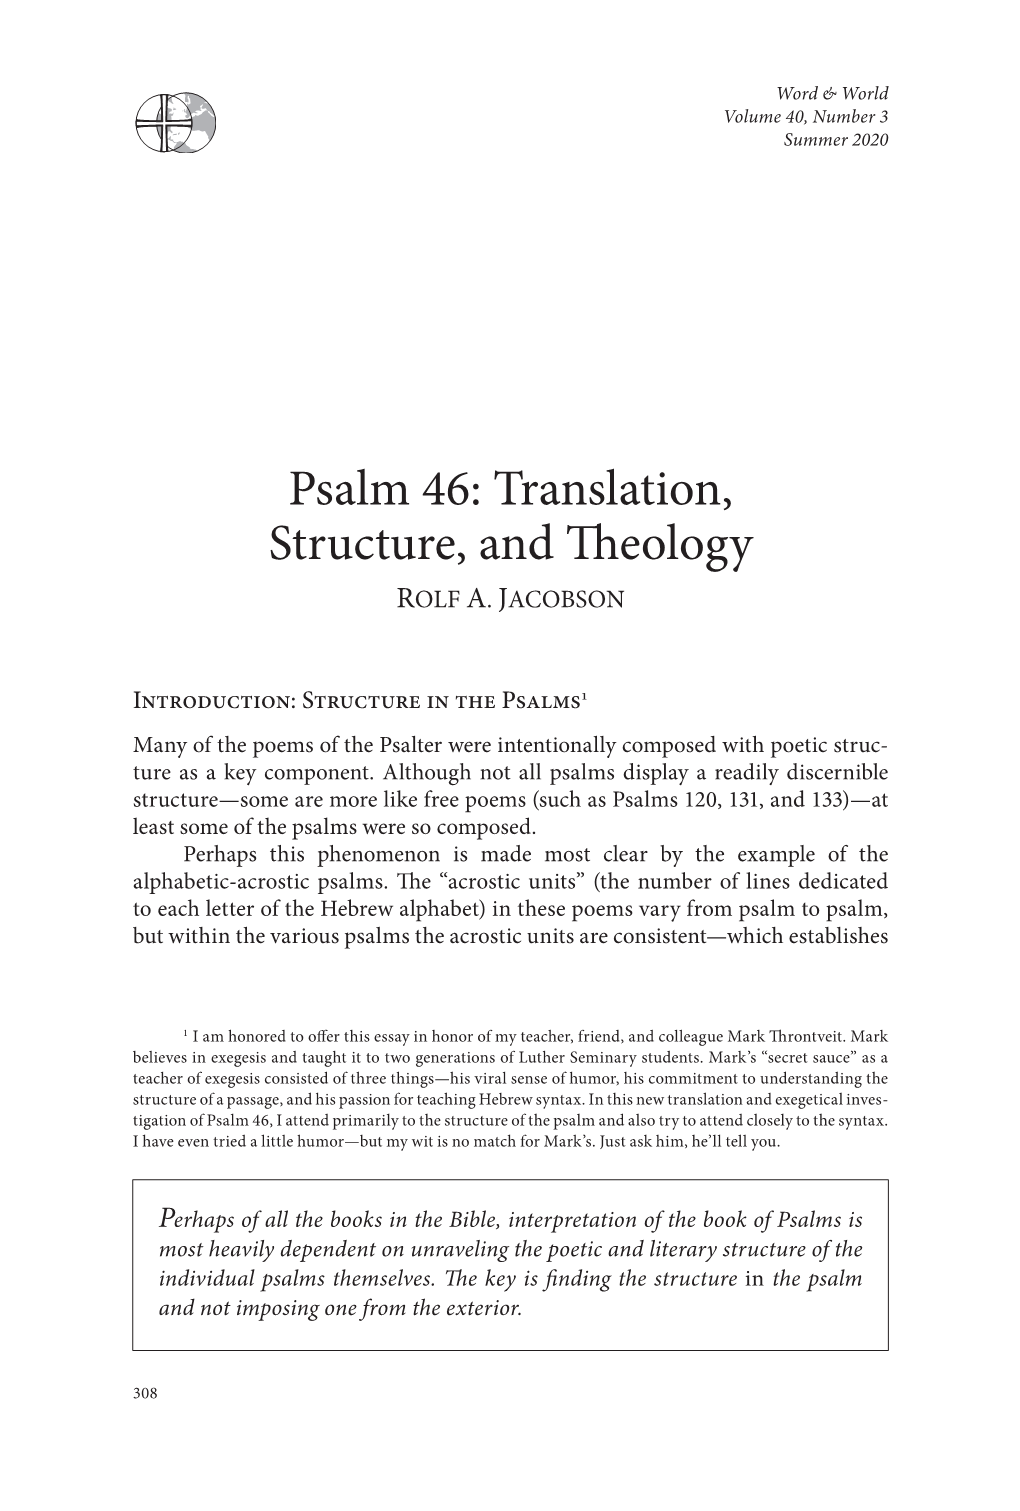 Psalm 46: Translation, Structure, and Theology ROLF A